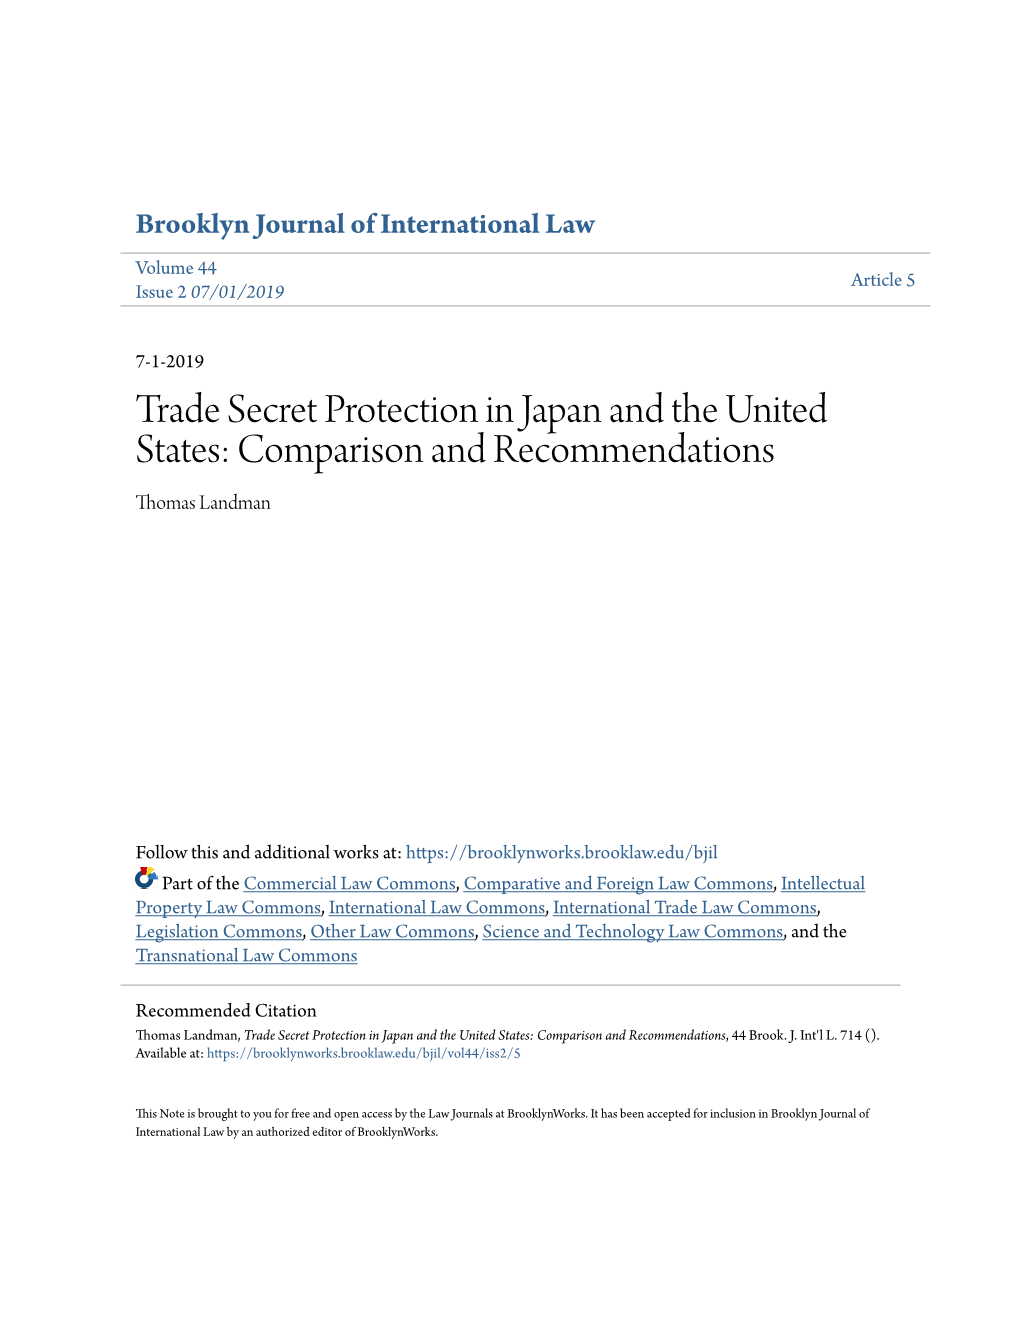 Trade Secret Protection in Japan and the United States: Comparison and Recommendations Thomas Landman